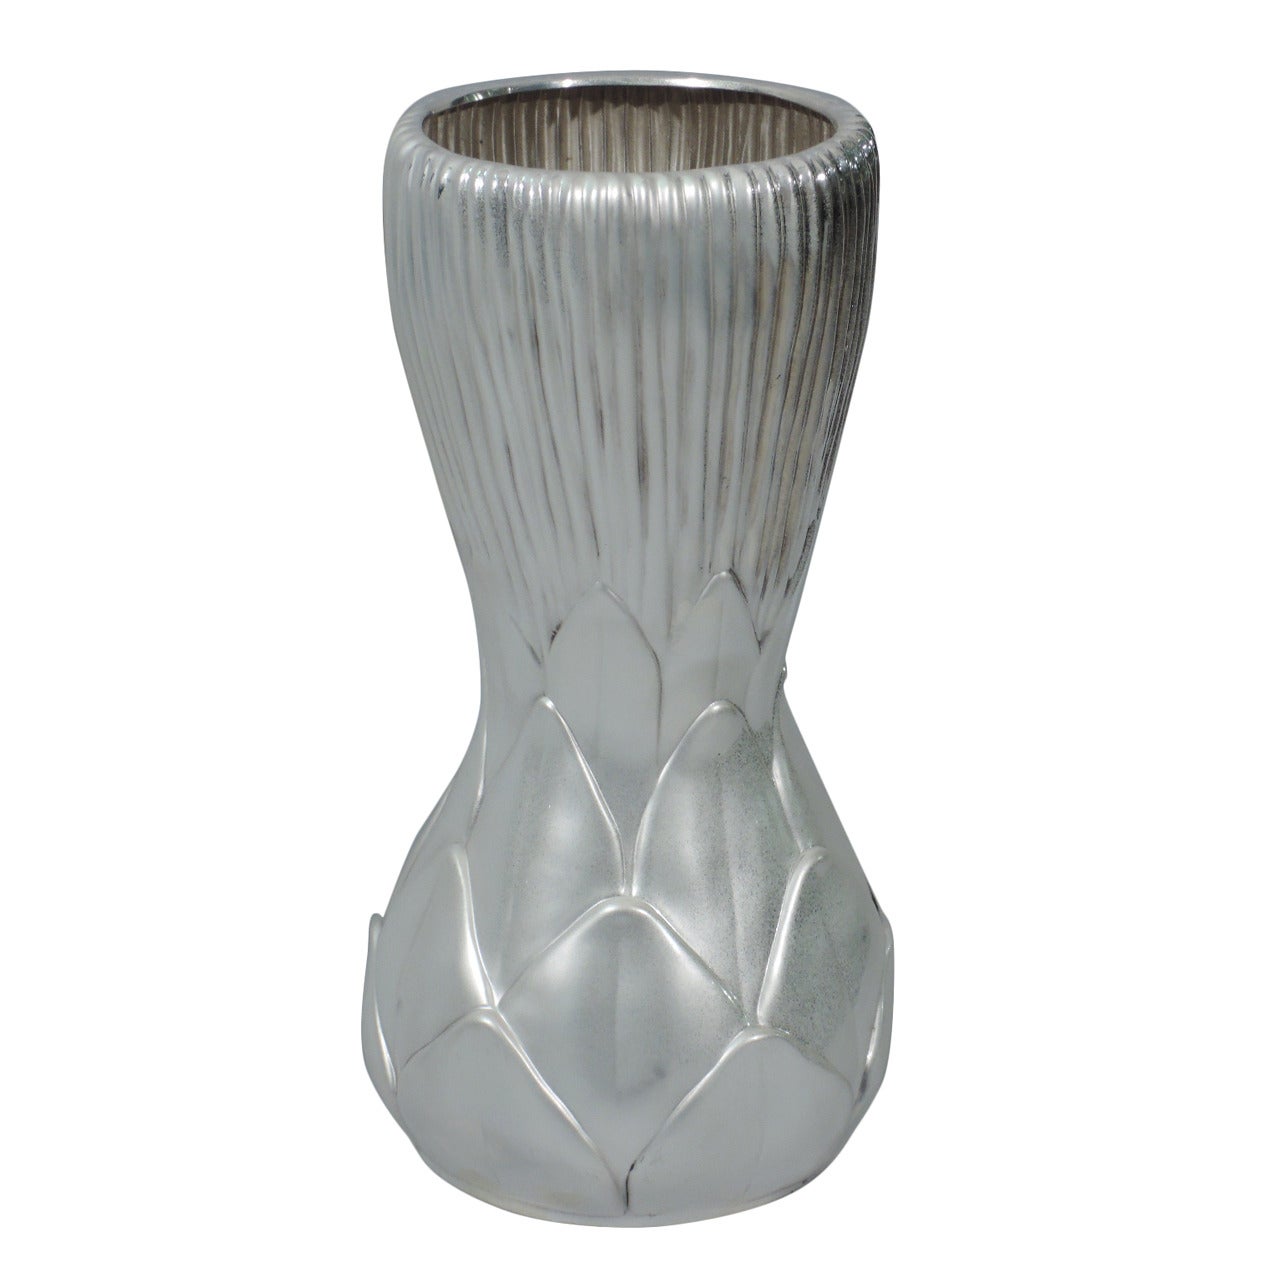 Contemporary Tiffany Sterling Silver Vase of Aesthetic Inspiration